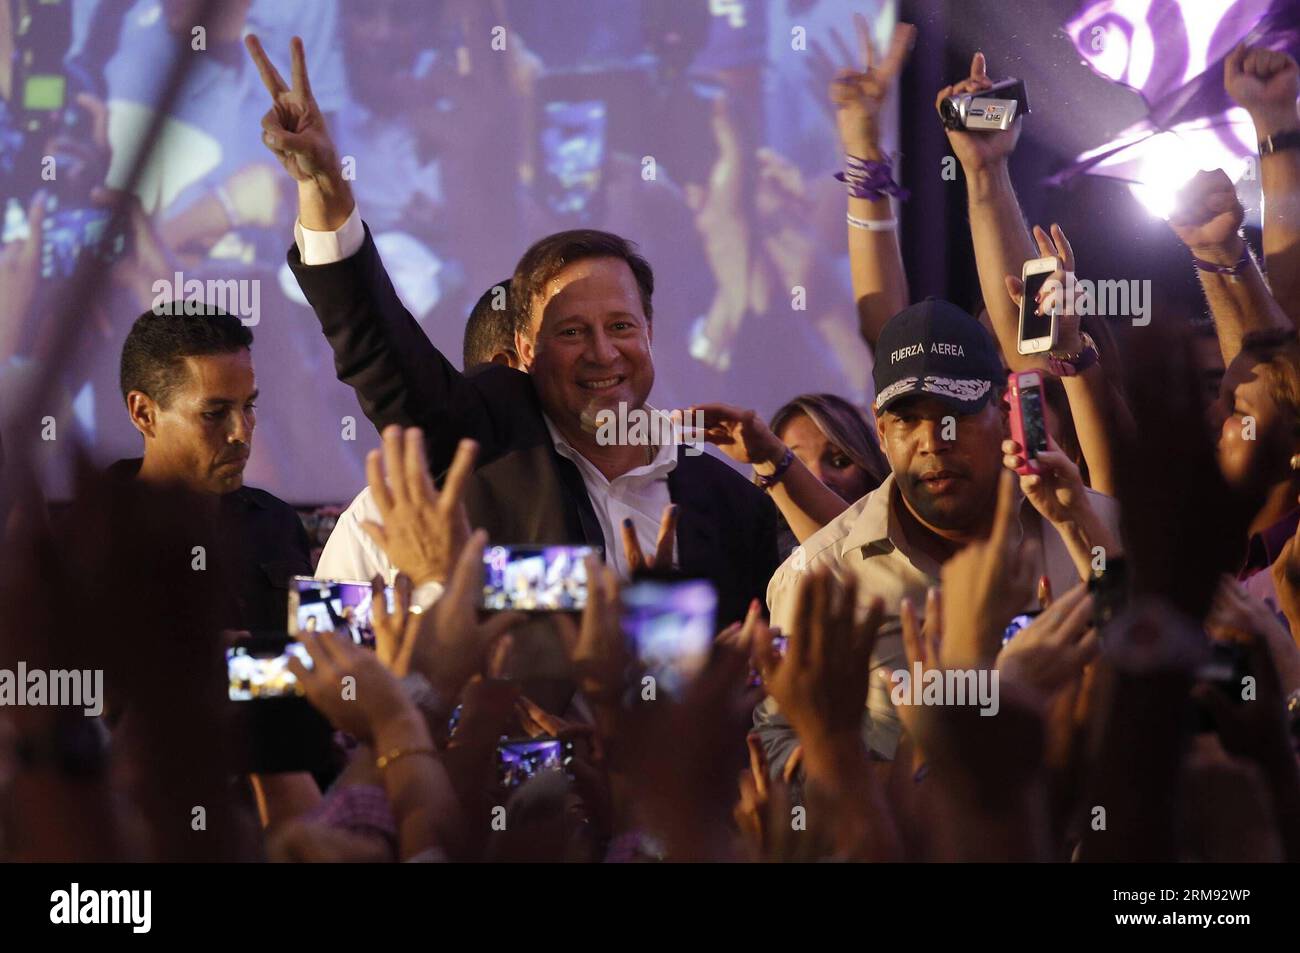 PANAMA CITY, May 4, 2014 (Xinhua) -- Presidential candidate Juan Carlos Varela (C) from the Panamenista Party greets his supporters after the preliminary results of the general elections, in Panama City, capital of Panama, on May 4, 2014. President of the Supreme Electoral Court Erasmo Pinilla said on Sunday night that Juan Carlos Varela is the virtual winner of Panama s presidency.(Xinhua/Mauricio Valenzuela) PANAMA-PANAMA CITY-POLITICS-ELECTIONS PUBLICATIONxNOTxINxCHN   Panama City May 4 2014 XINHUA Presidential Candidate Juan Carlos Varela C from The  Party greets His Supporters After The p Stock Photo